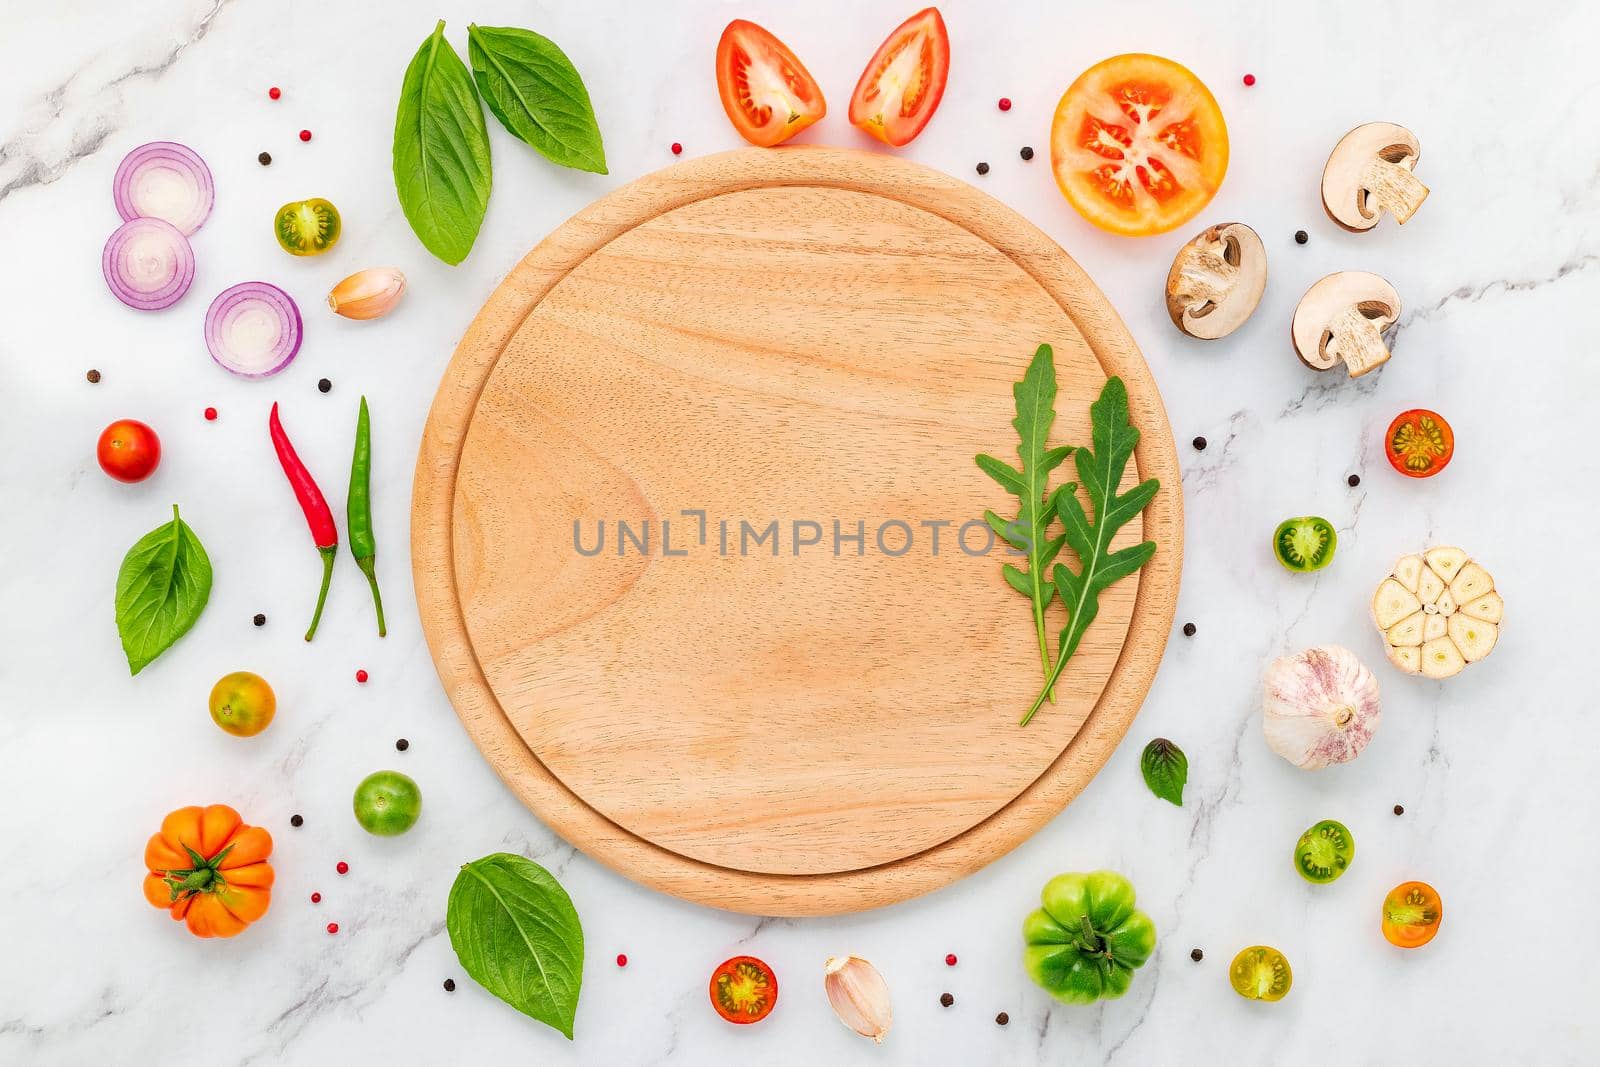 The ingredients for homemade pizza set up on white marble background. by kerdkanno